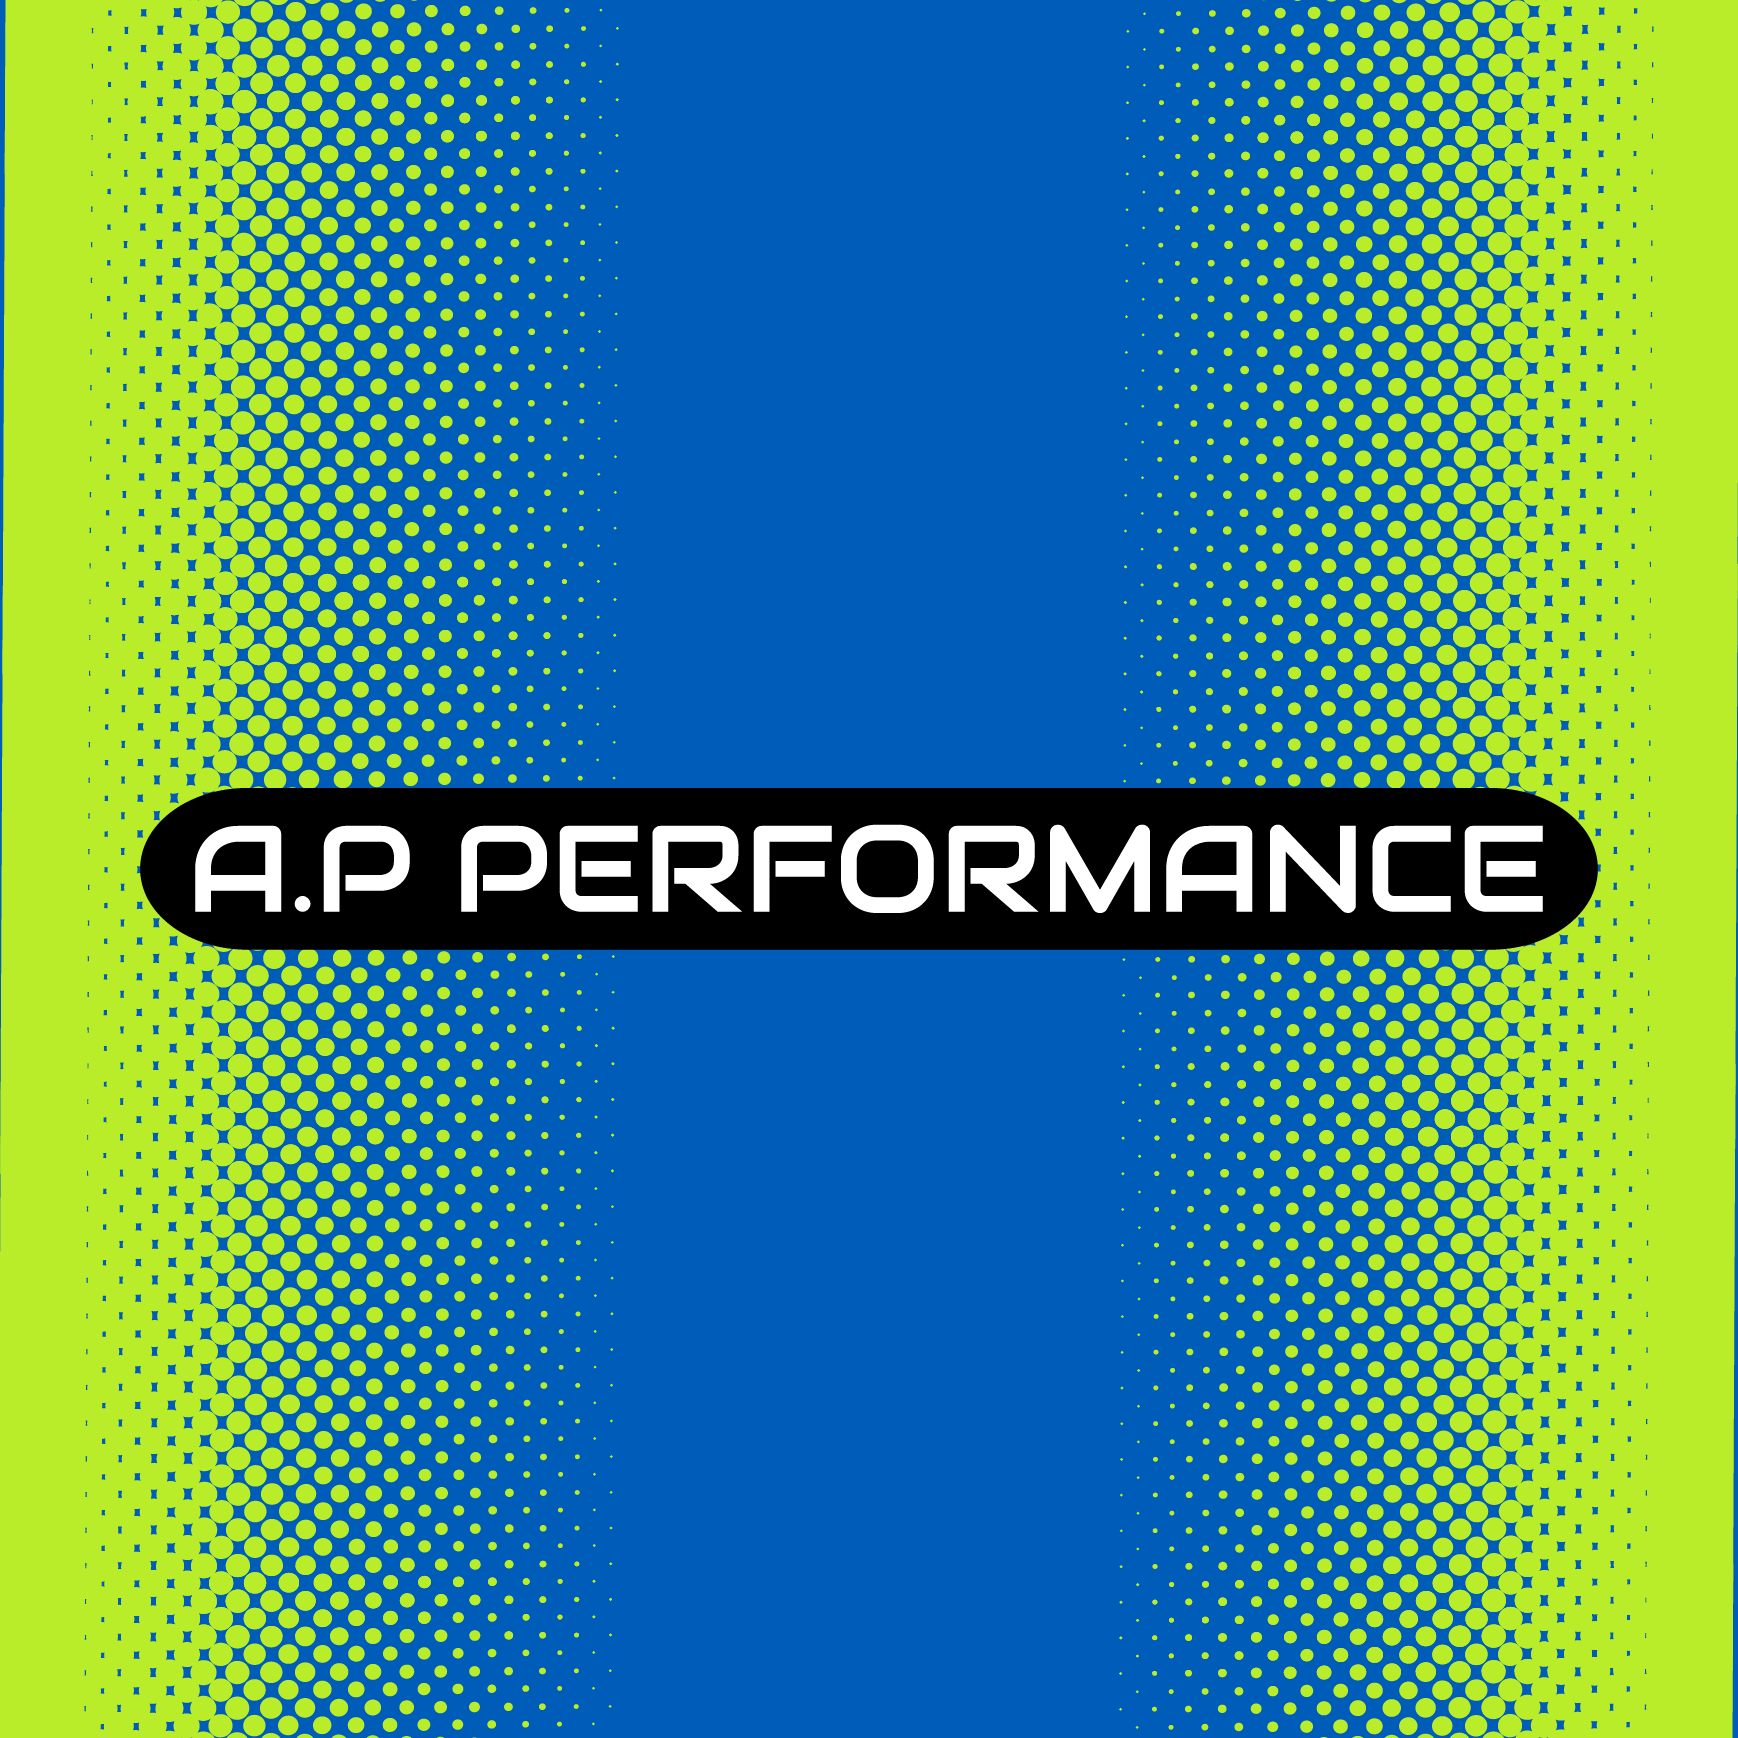 Club Image for AP PERFORMANCE